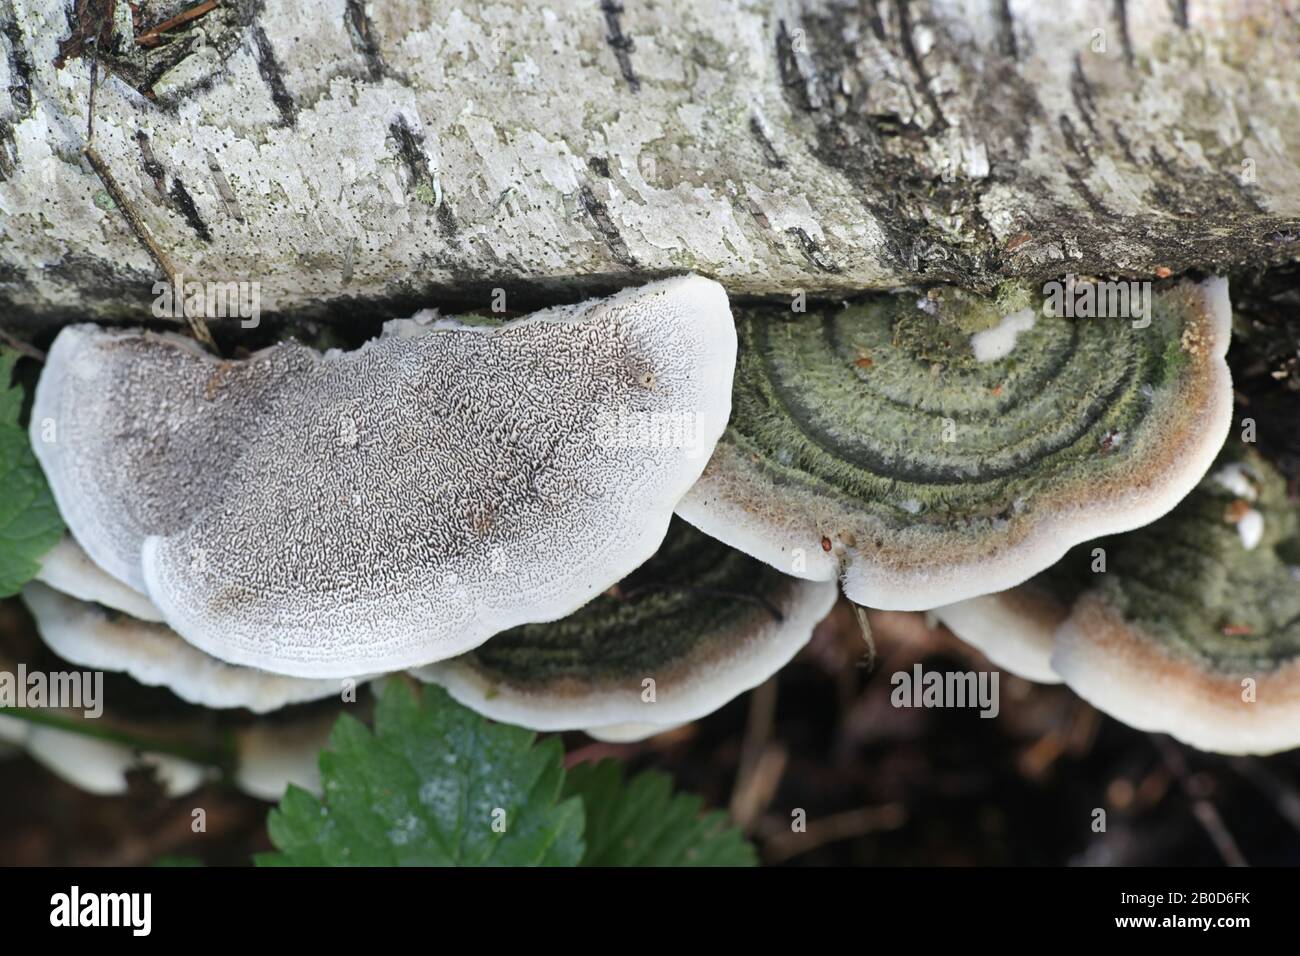 Cerrena unicolor, commonly known as the mossy maze polypore or canker rot fungus, wild bracket fungus from Finland Stock Photo